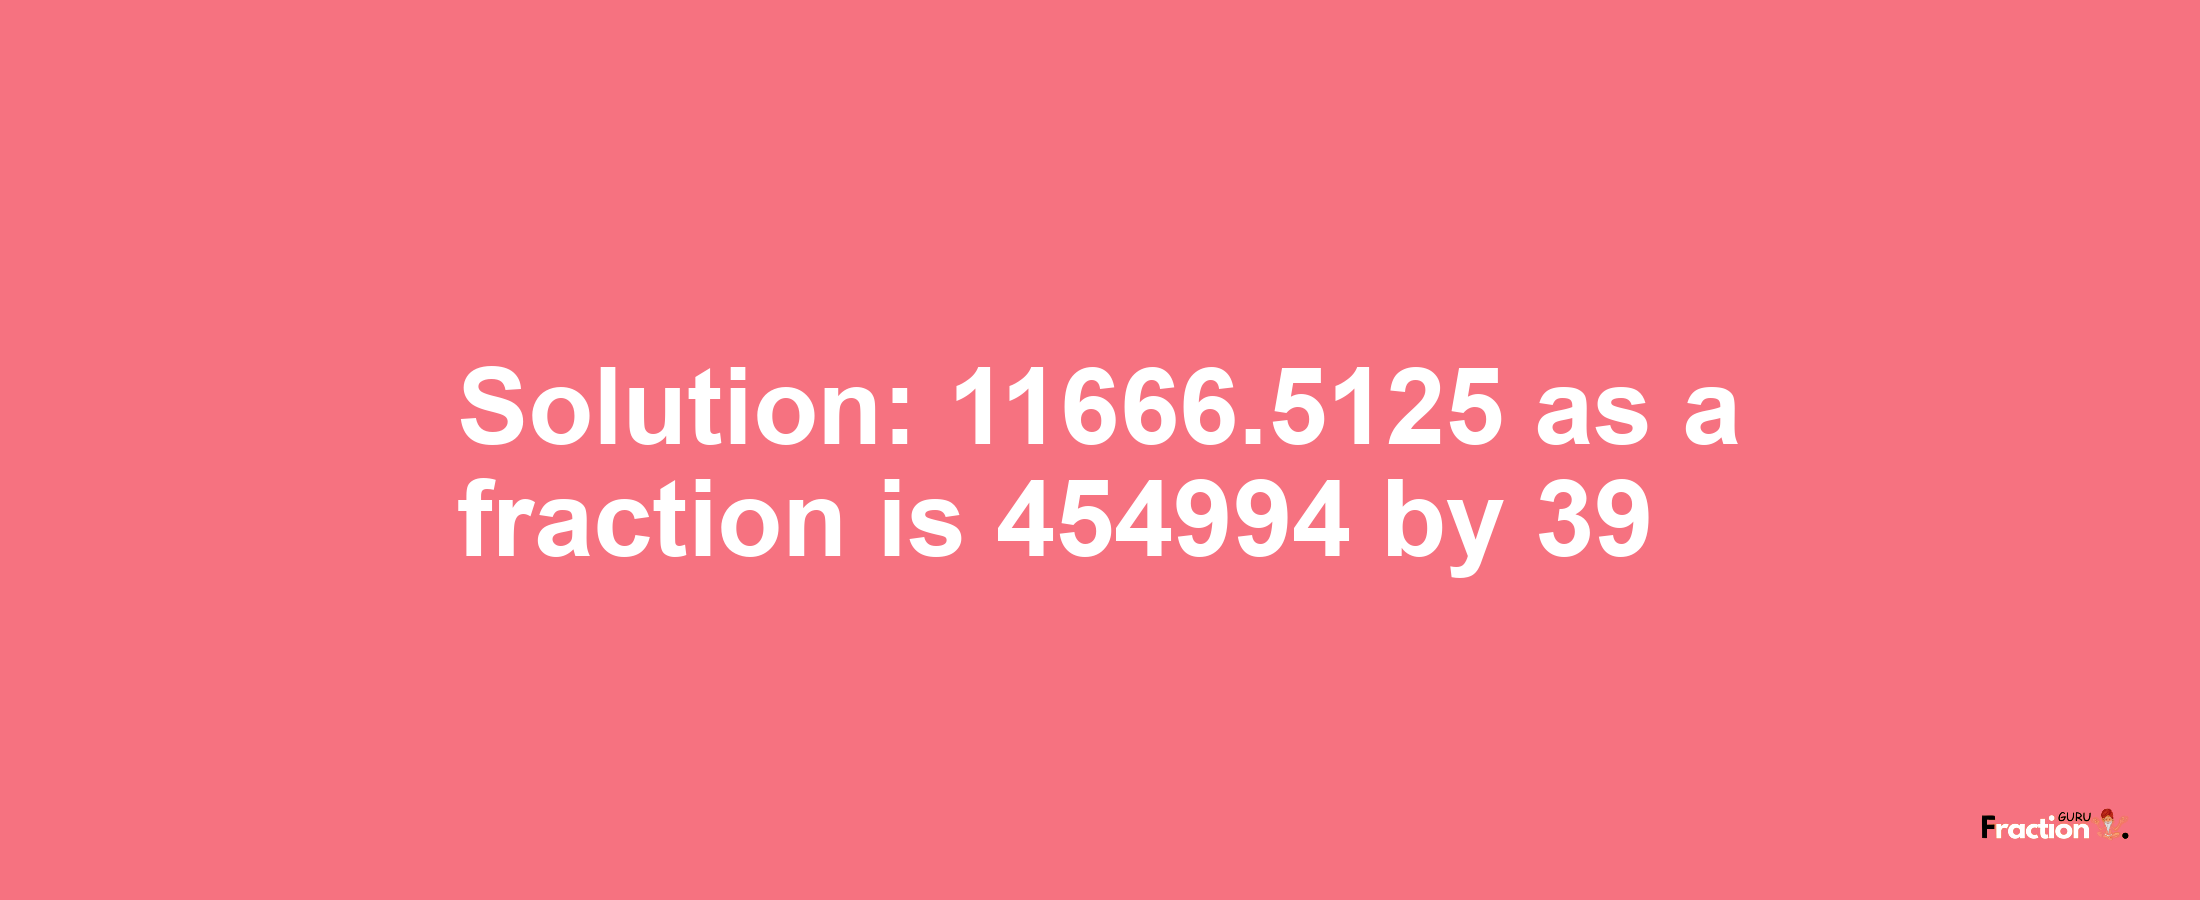 Solution:11666.5125 as a fraction is 454994/39